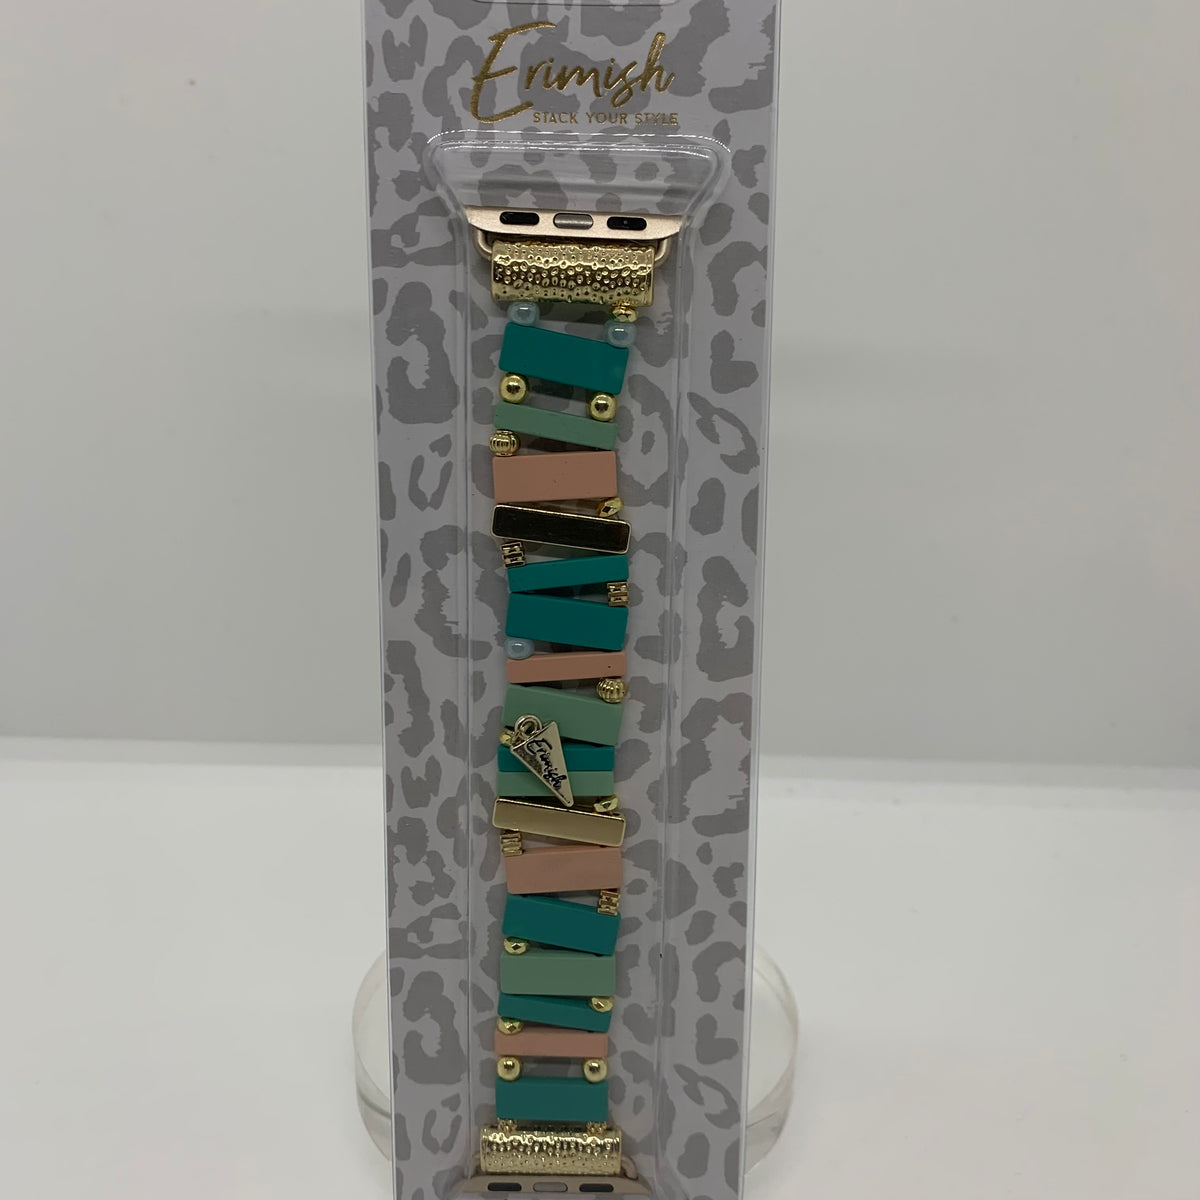 ERIMISH - #7 MILANO COLLECTION APPLE WATCH BAND - 14.5 CM